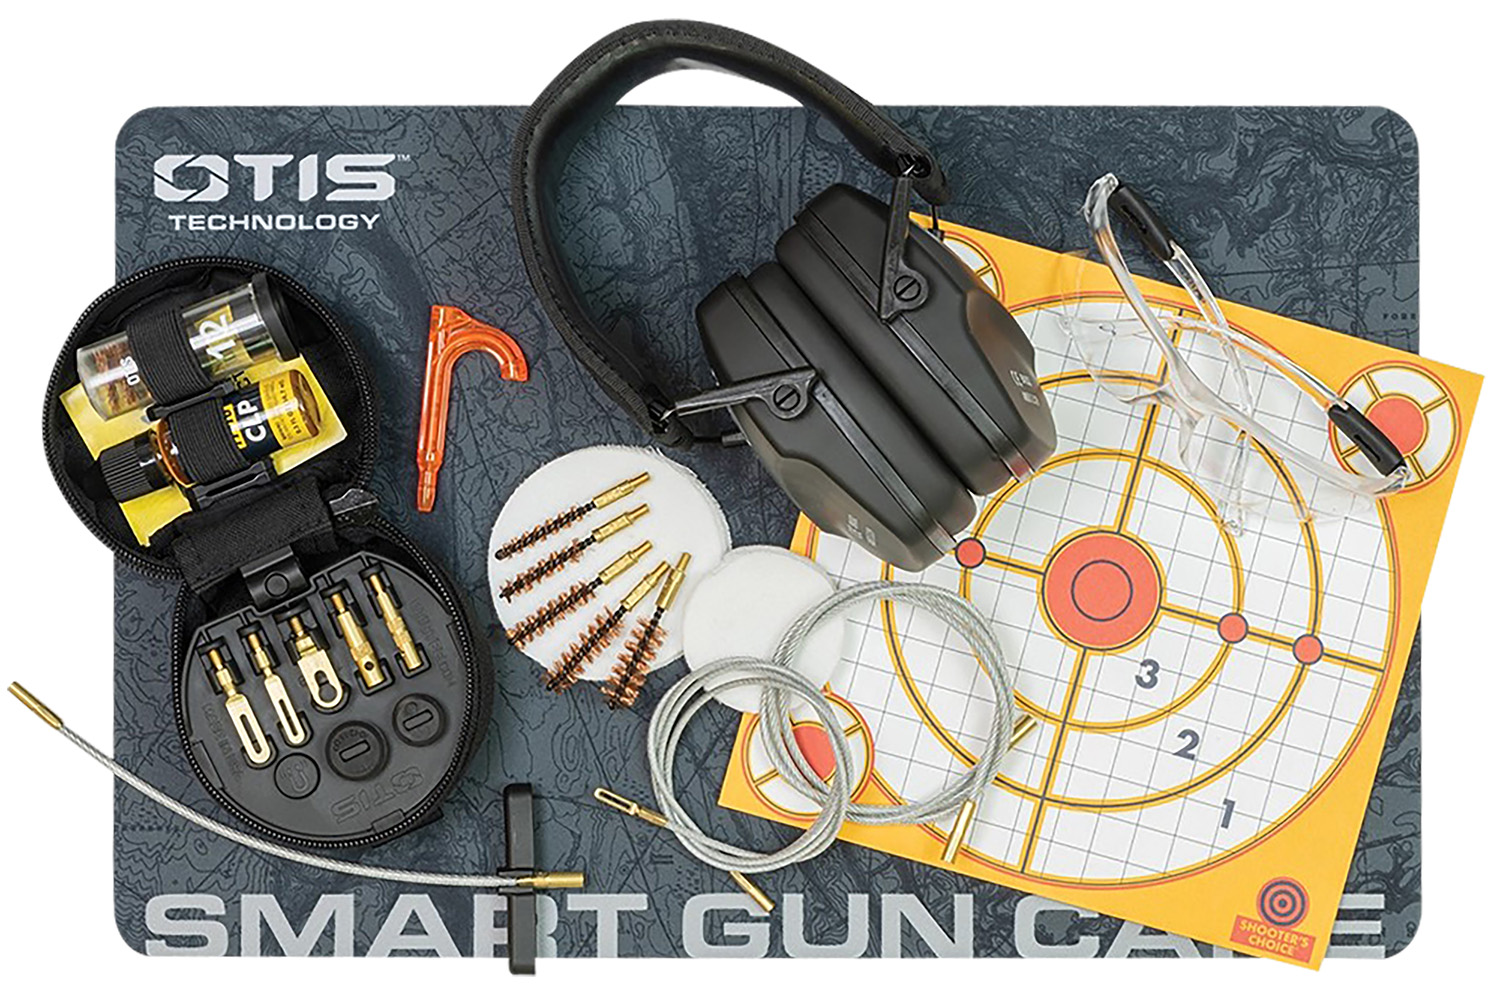 Otis GFNSB1 Shooting Bundle Includes Tactical Cleaning Kit .17 Cal-12 Gauge/Eye Protection/Ear Protection/Cleaning